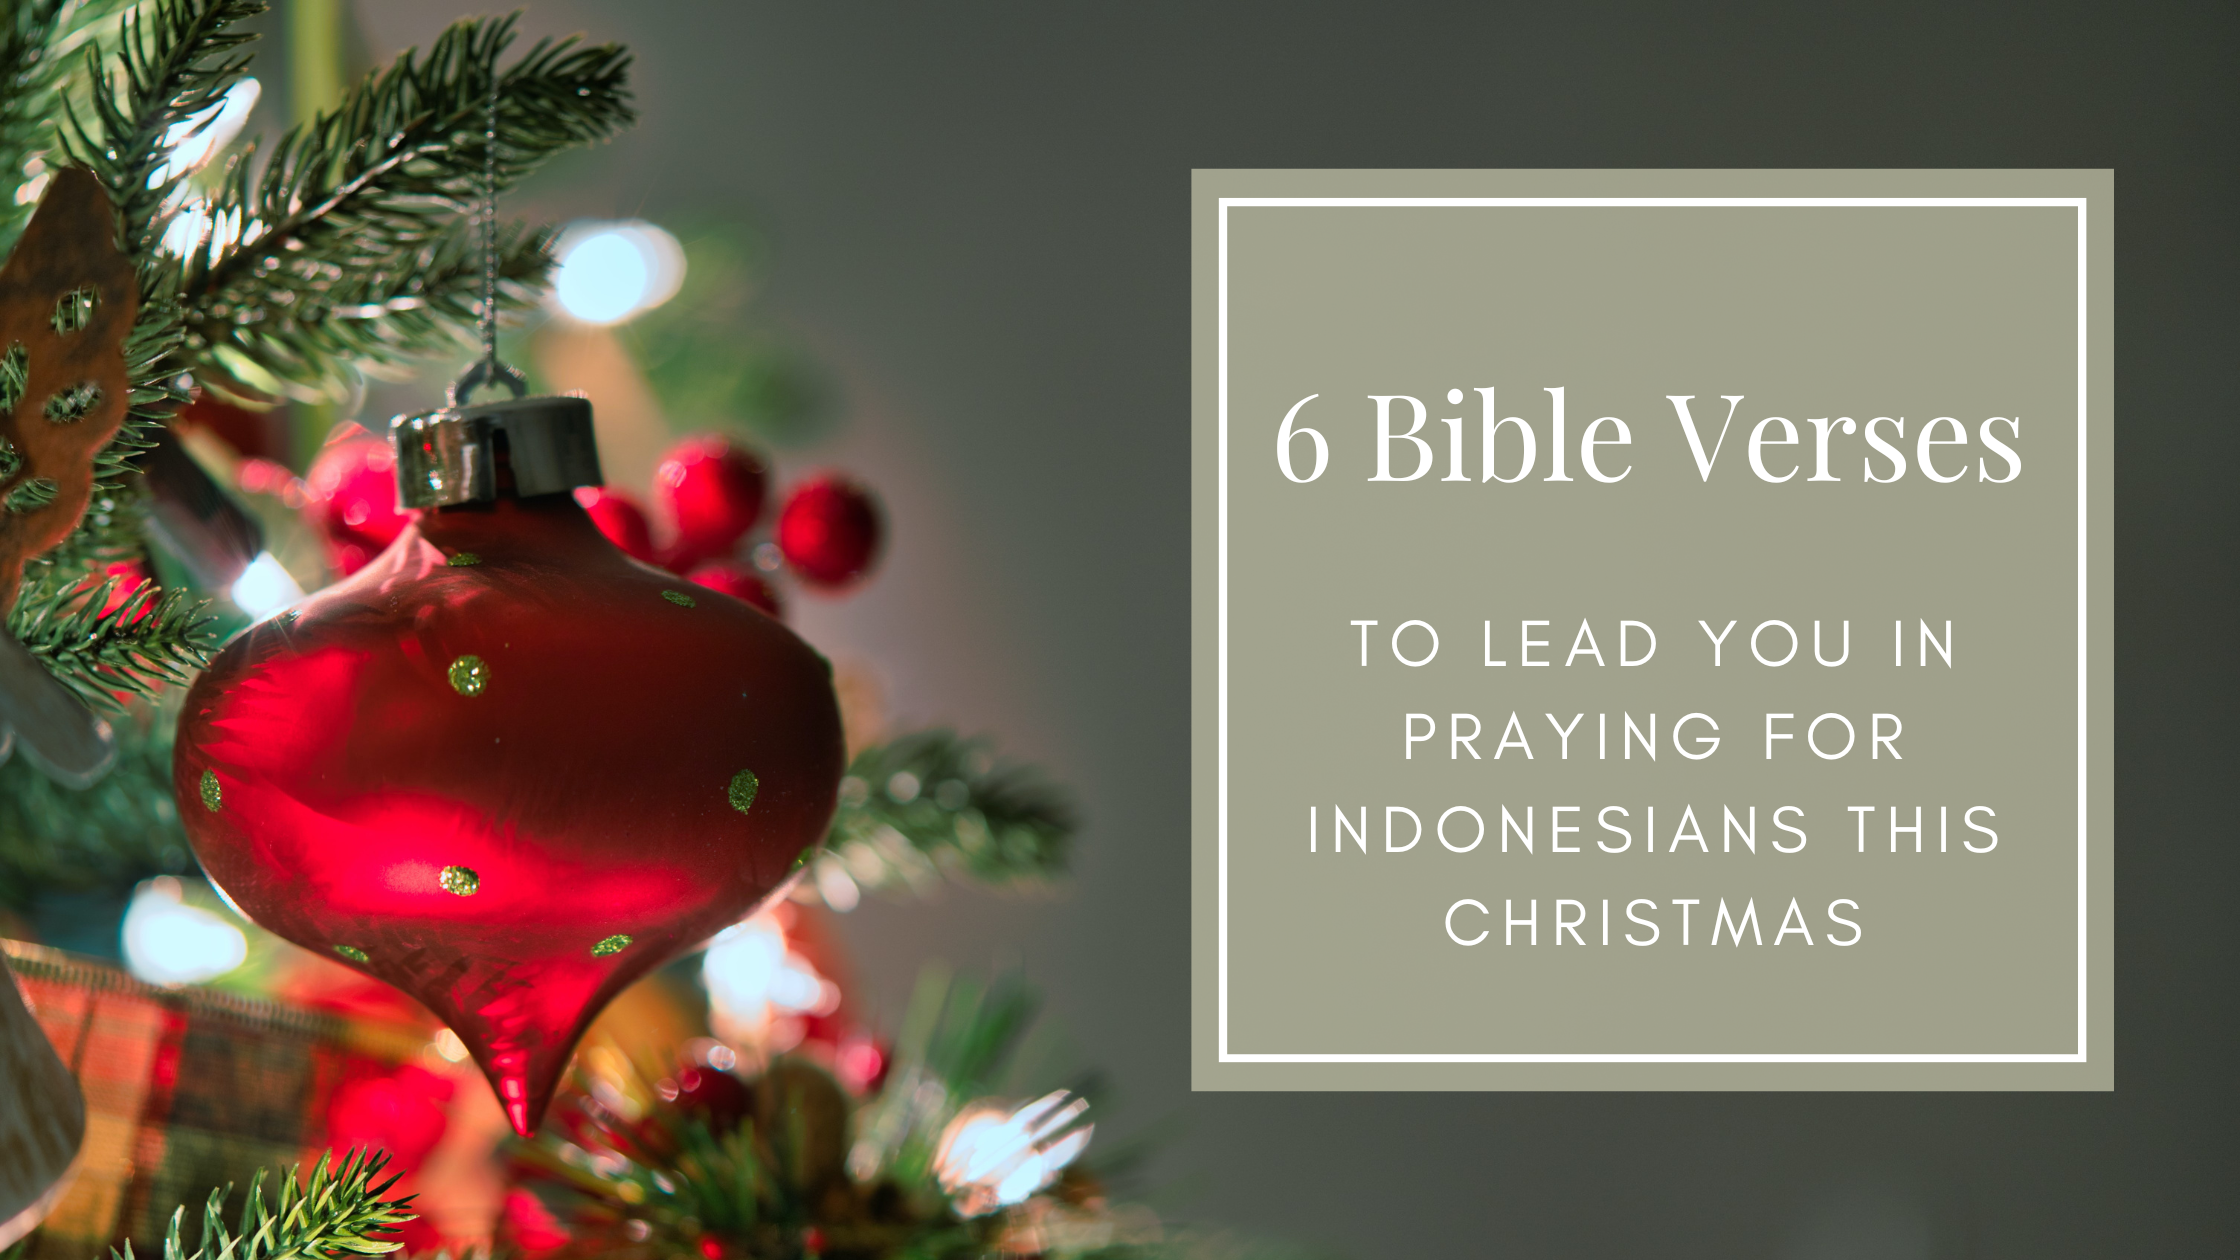 6 Bible verses to lead you